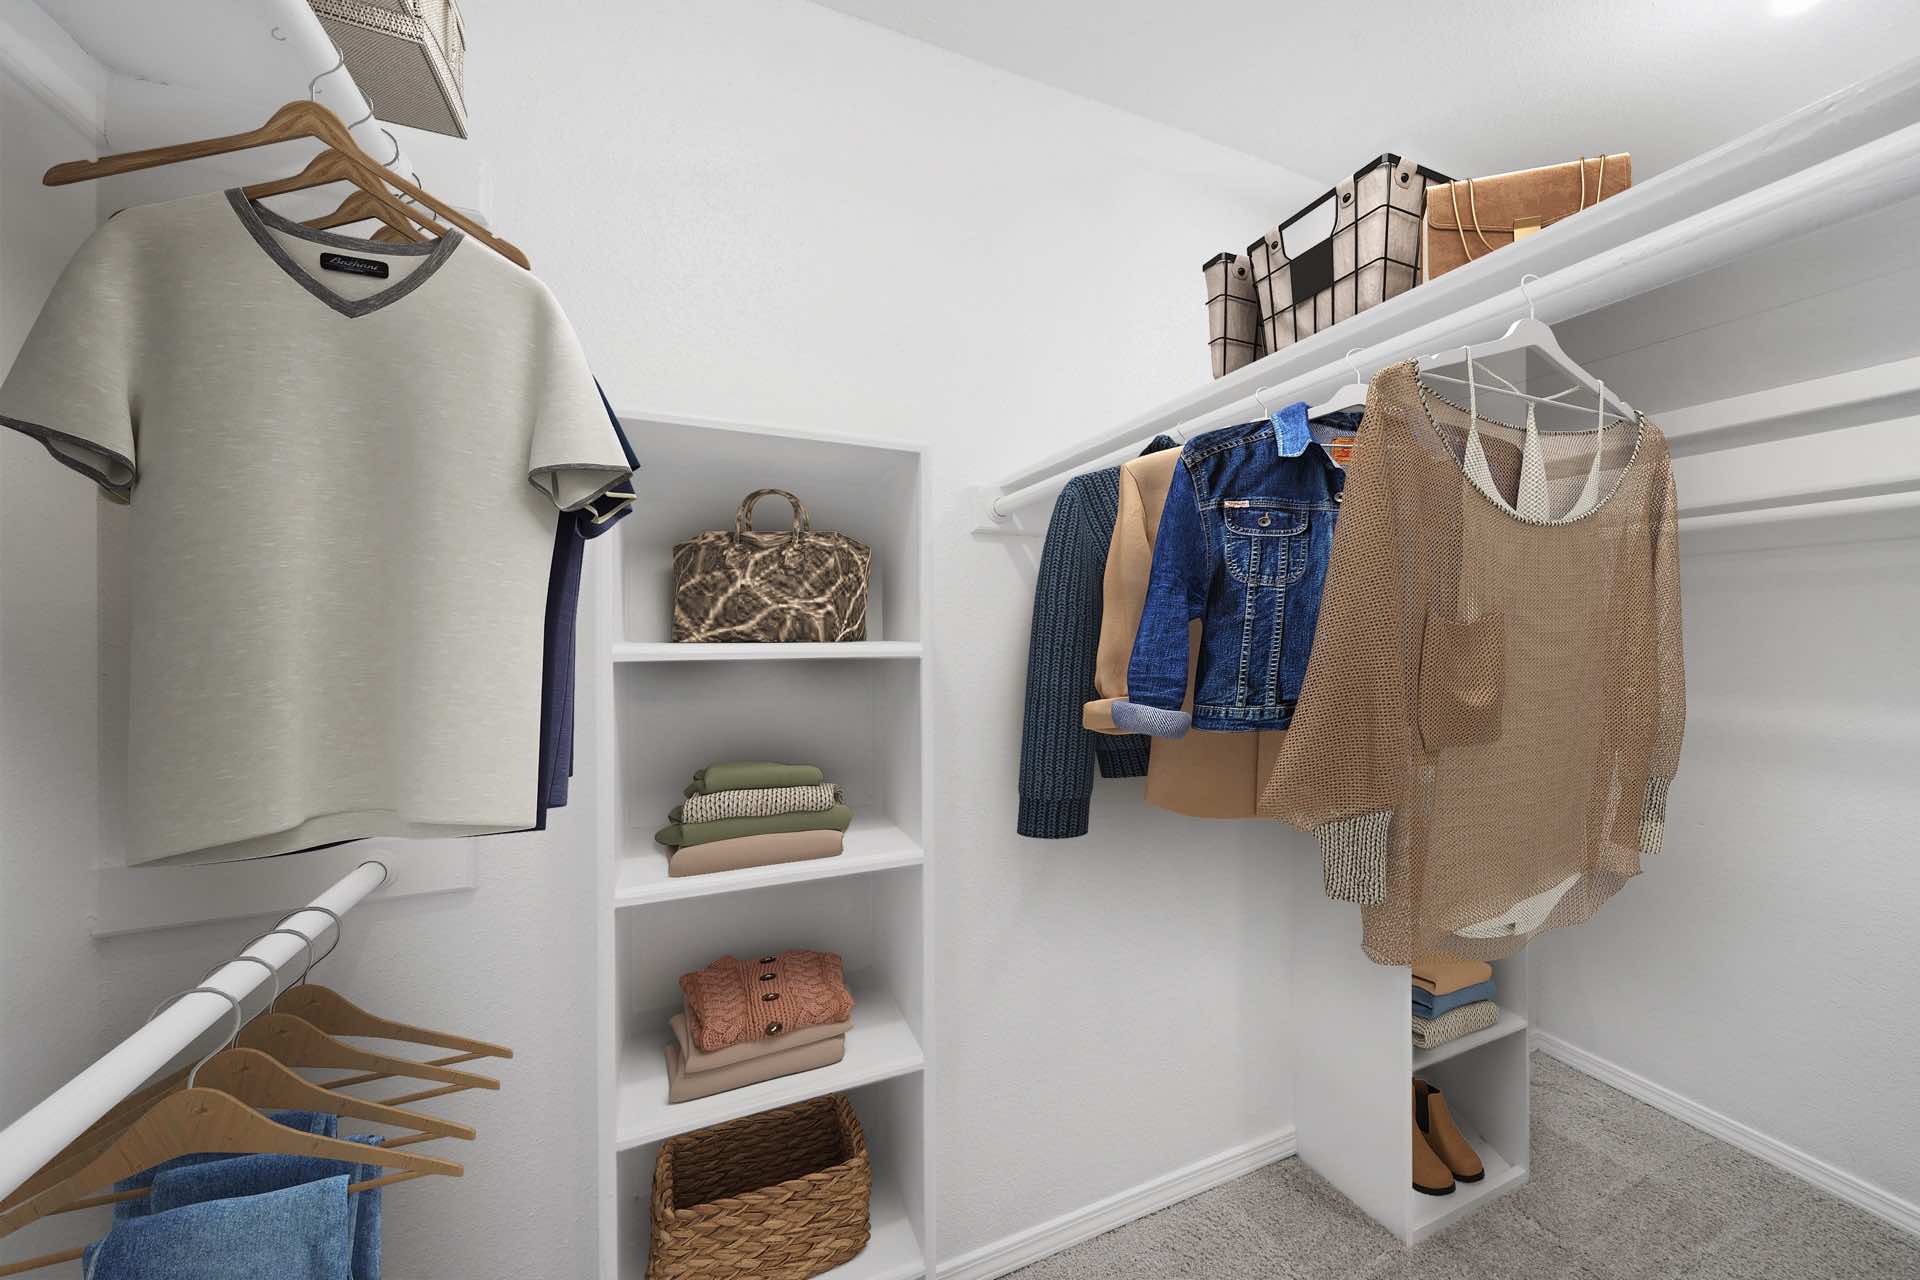 plenty of clothes hanging space and shelving in walk-in closet